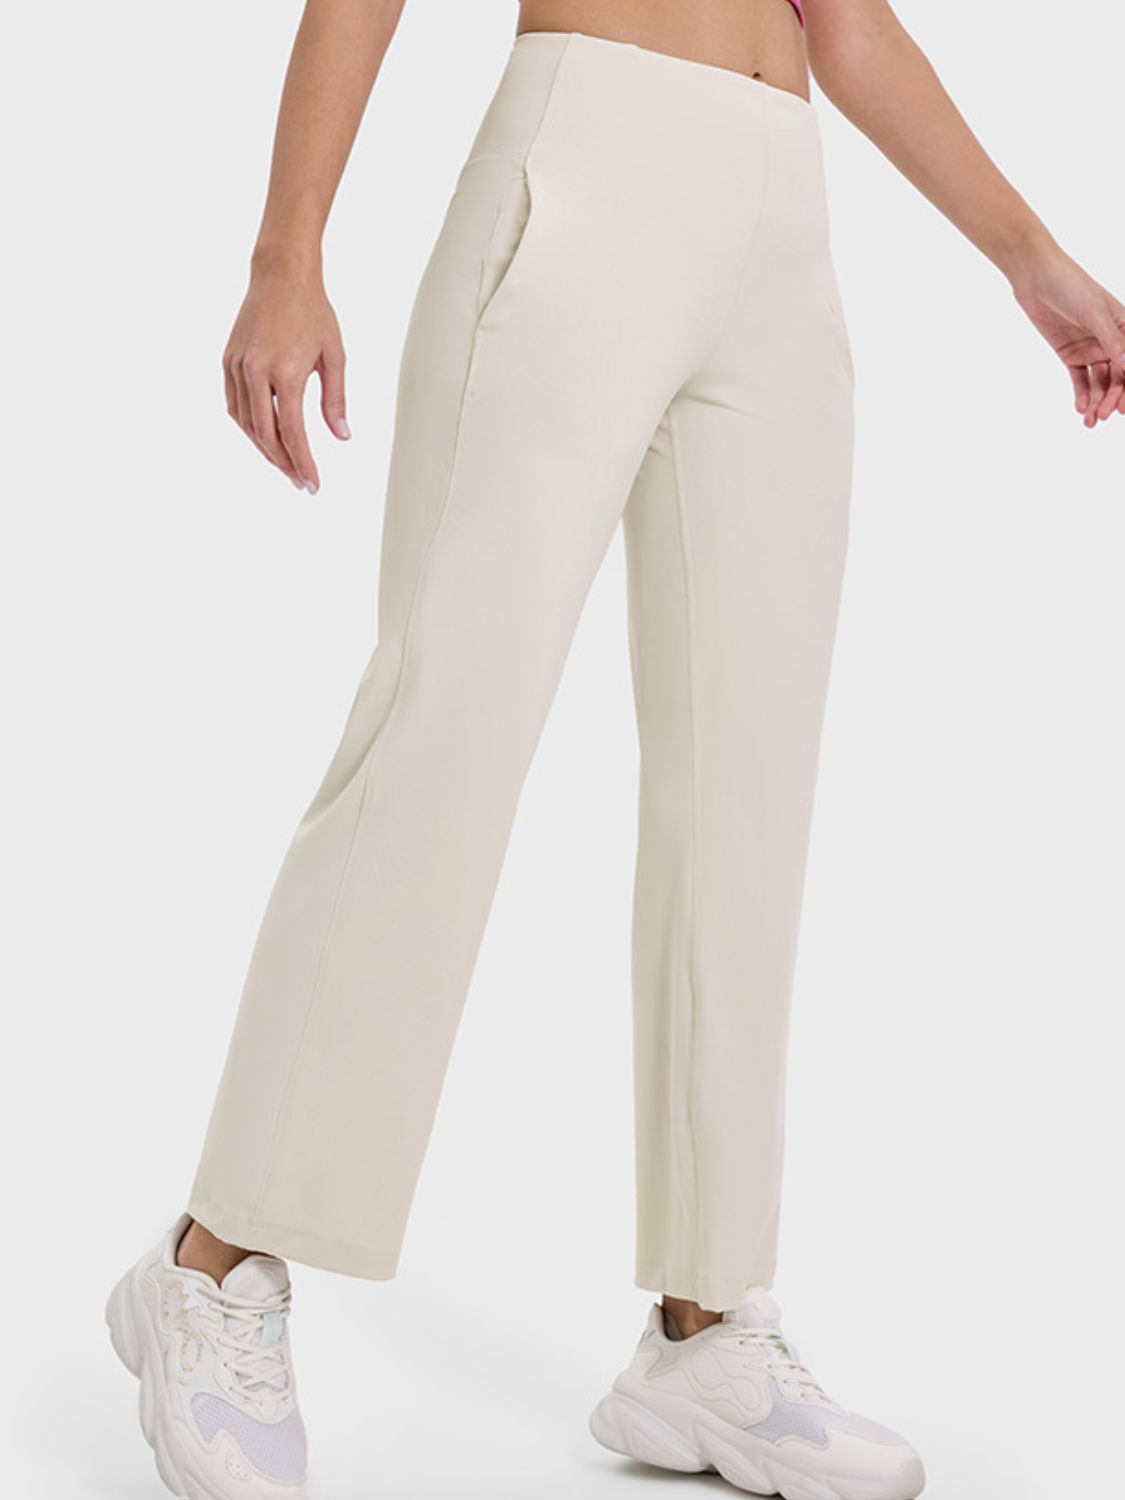 Pocketed High Waist Active Pants Beige